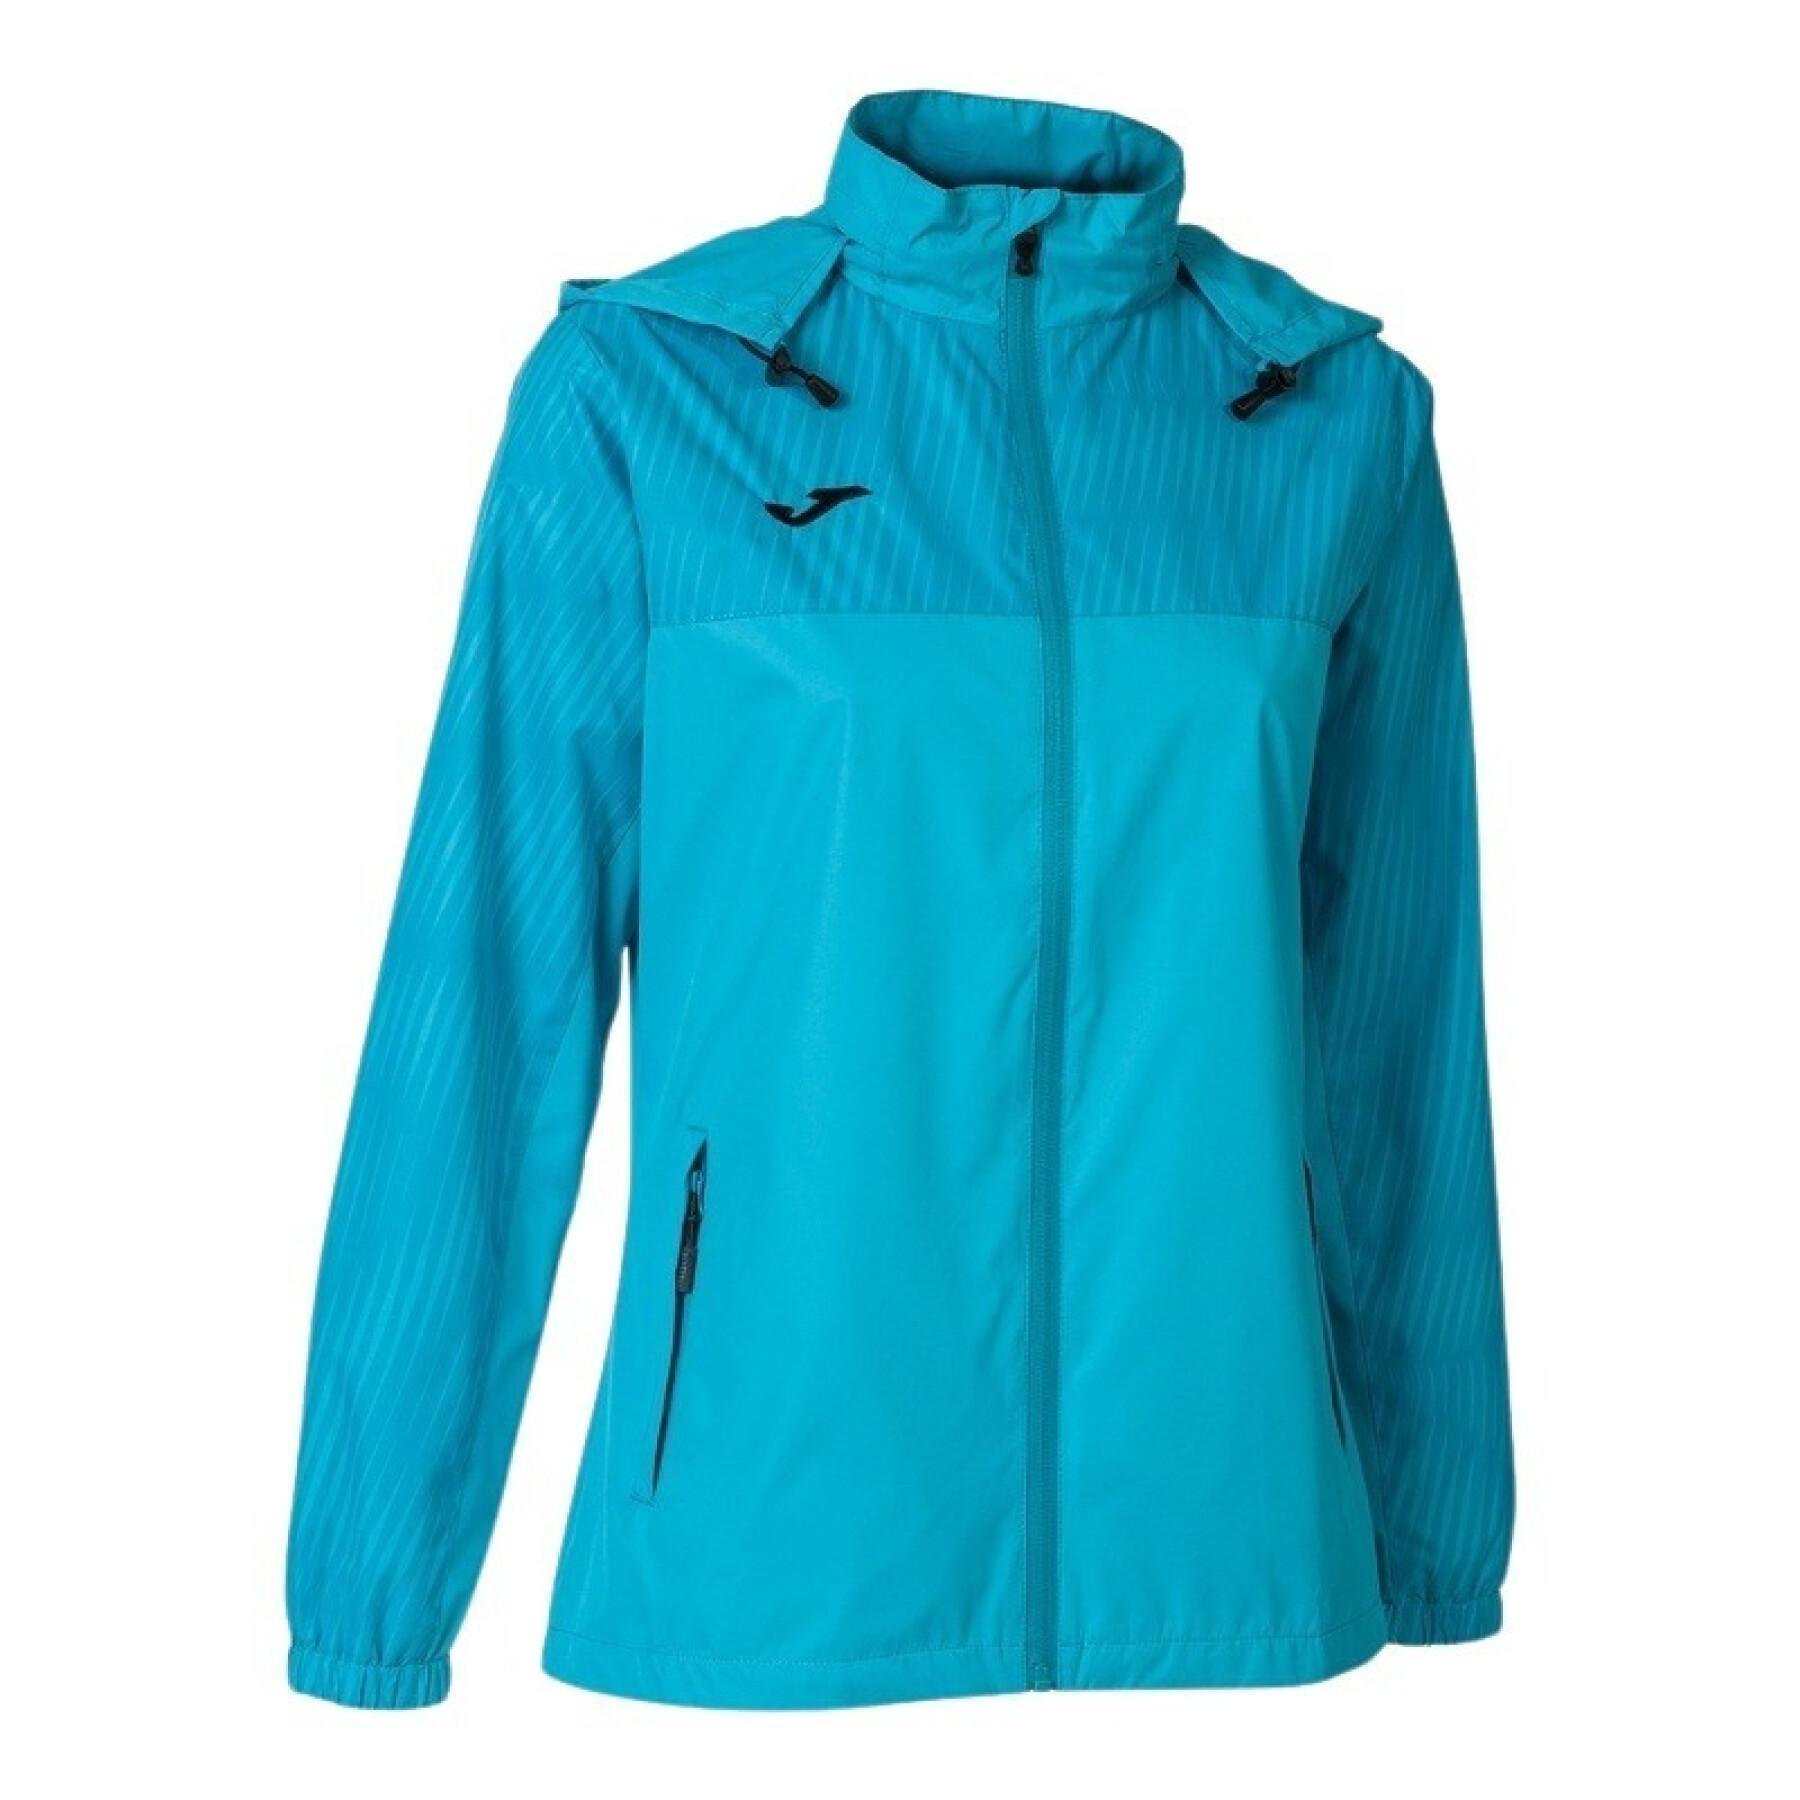 Chaqueta impermeable para mujer Joma Montreal - Joma - Marcas - Textil